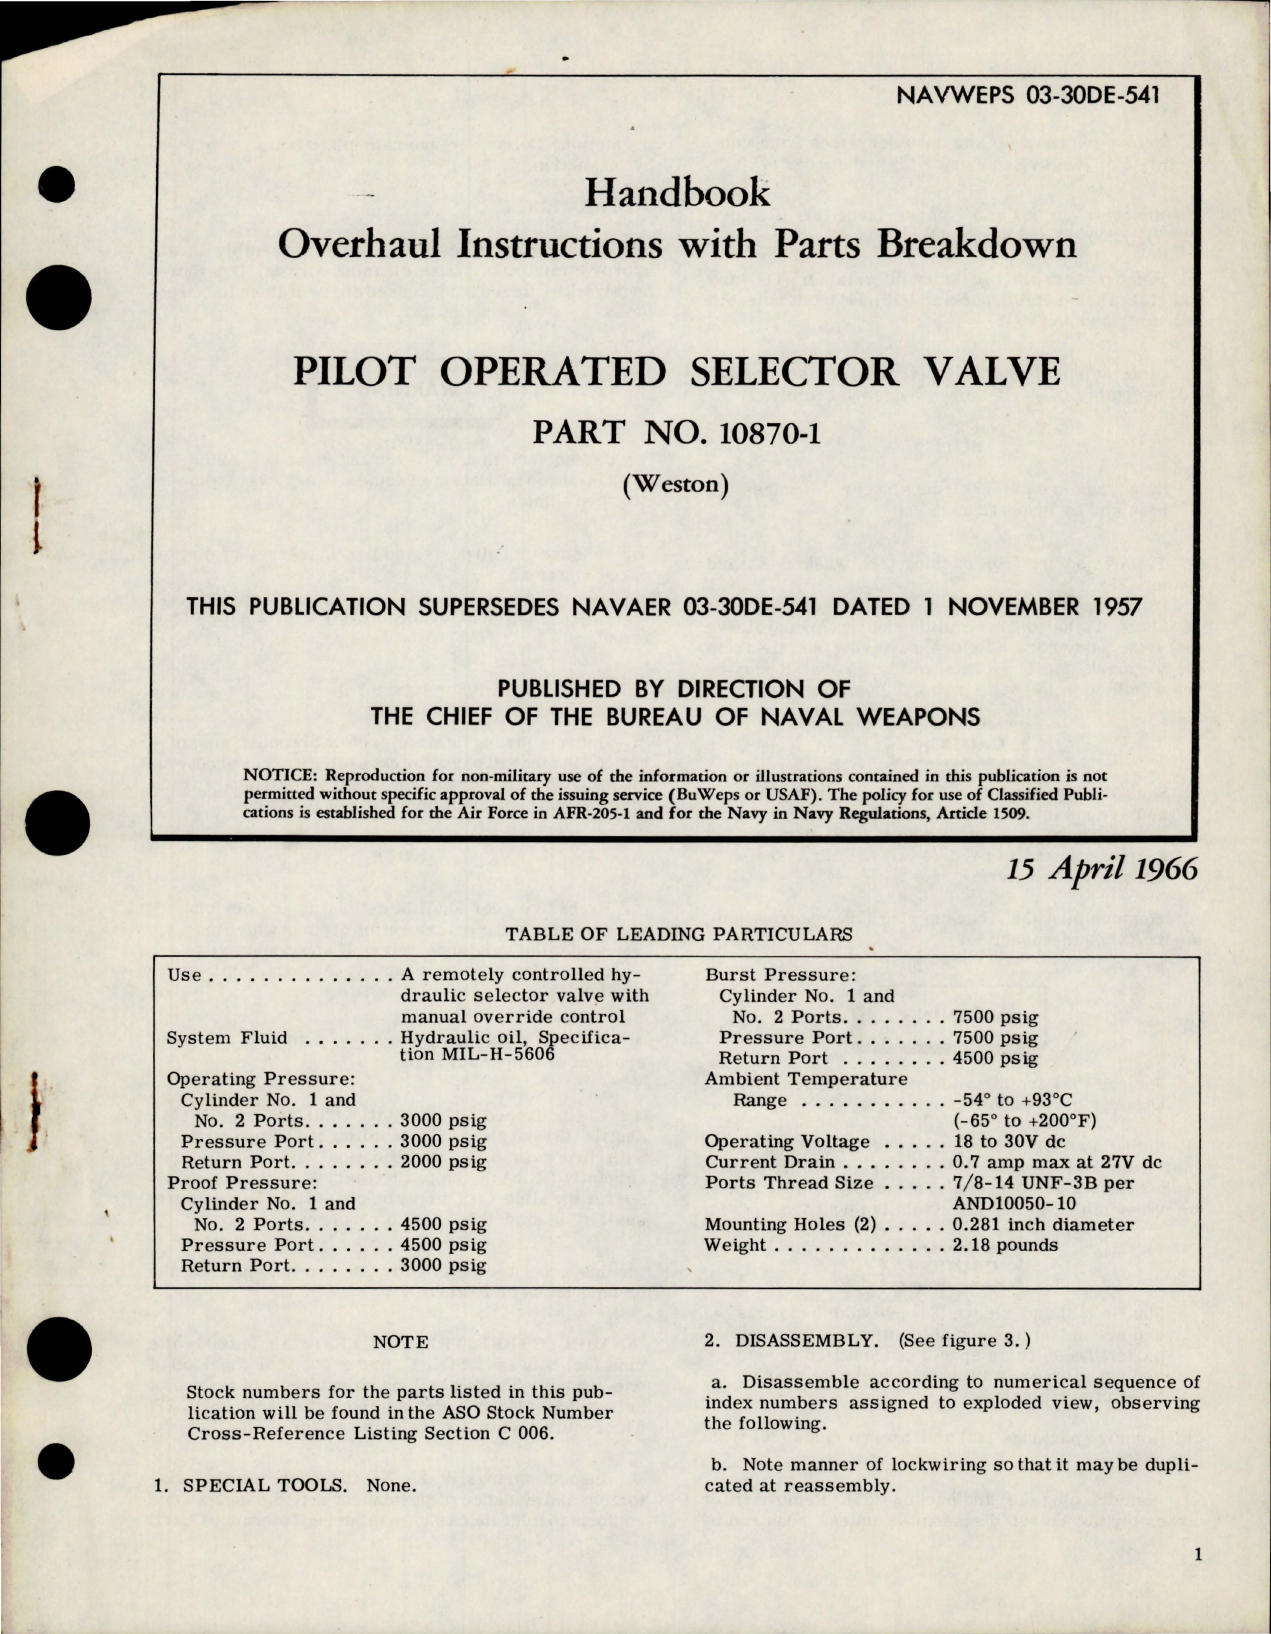 Sample page 1 from AirCorps Library document: Overhaul Instructions with Parts Breakdown for Pilot Operated Selector Valve - Part 10870-1 